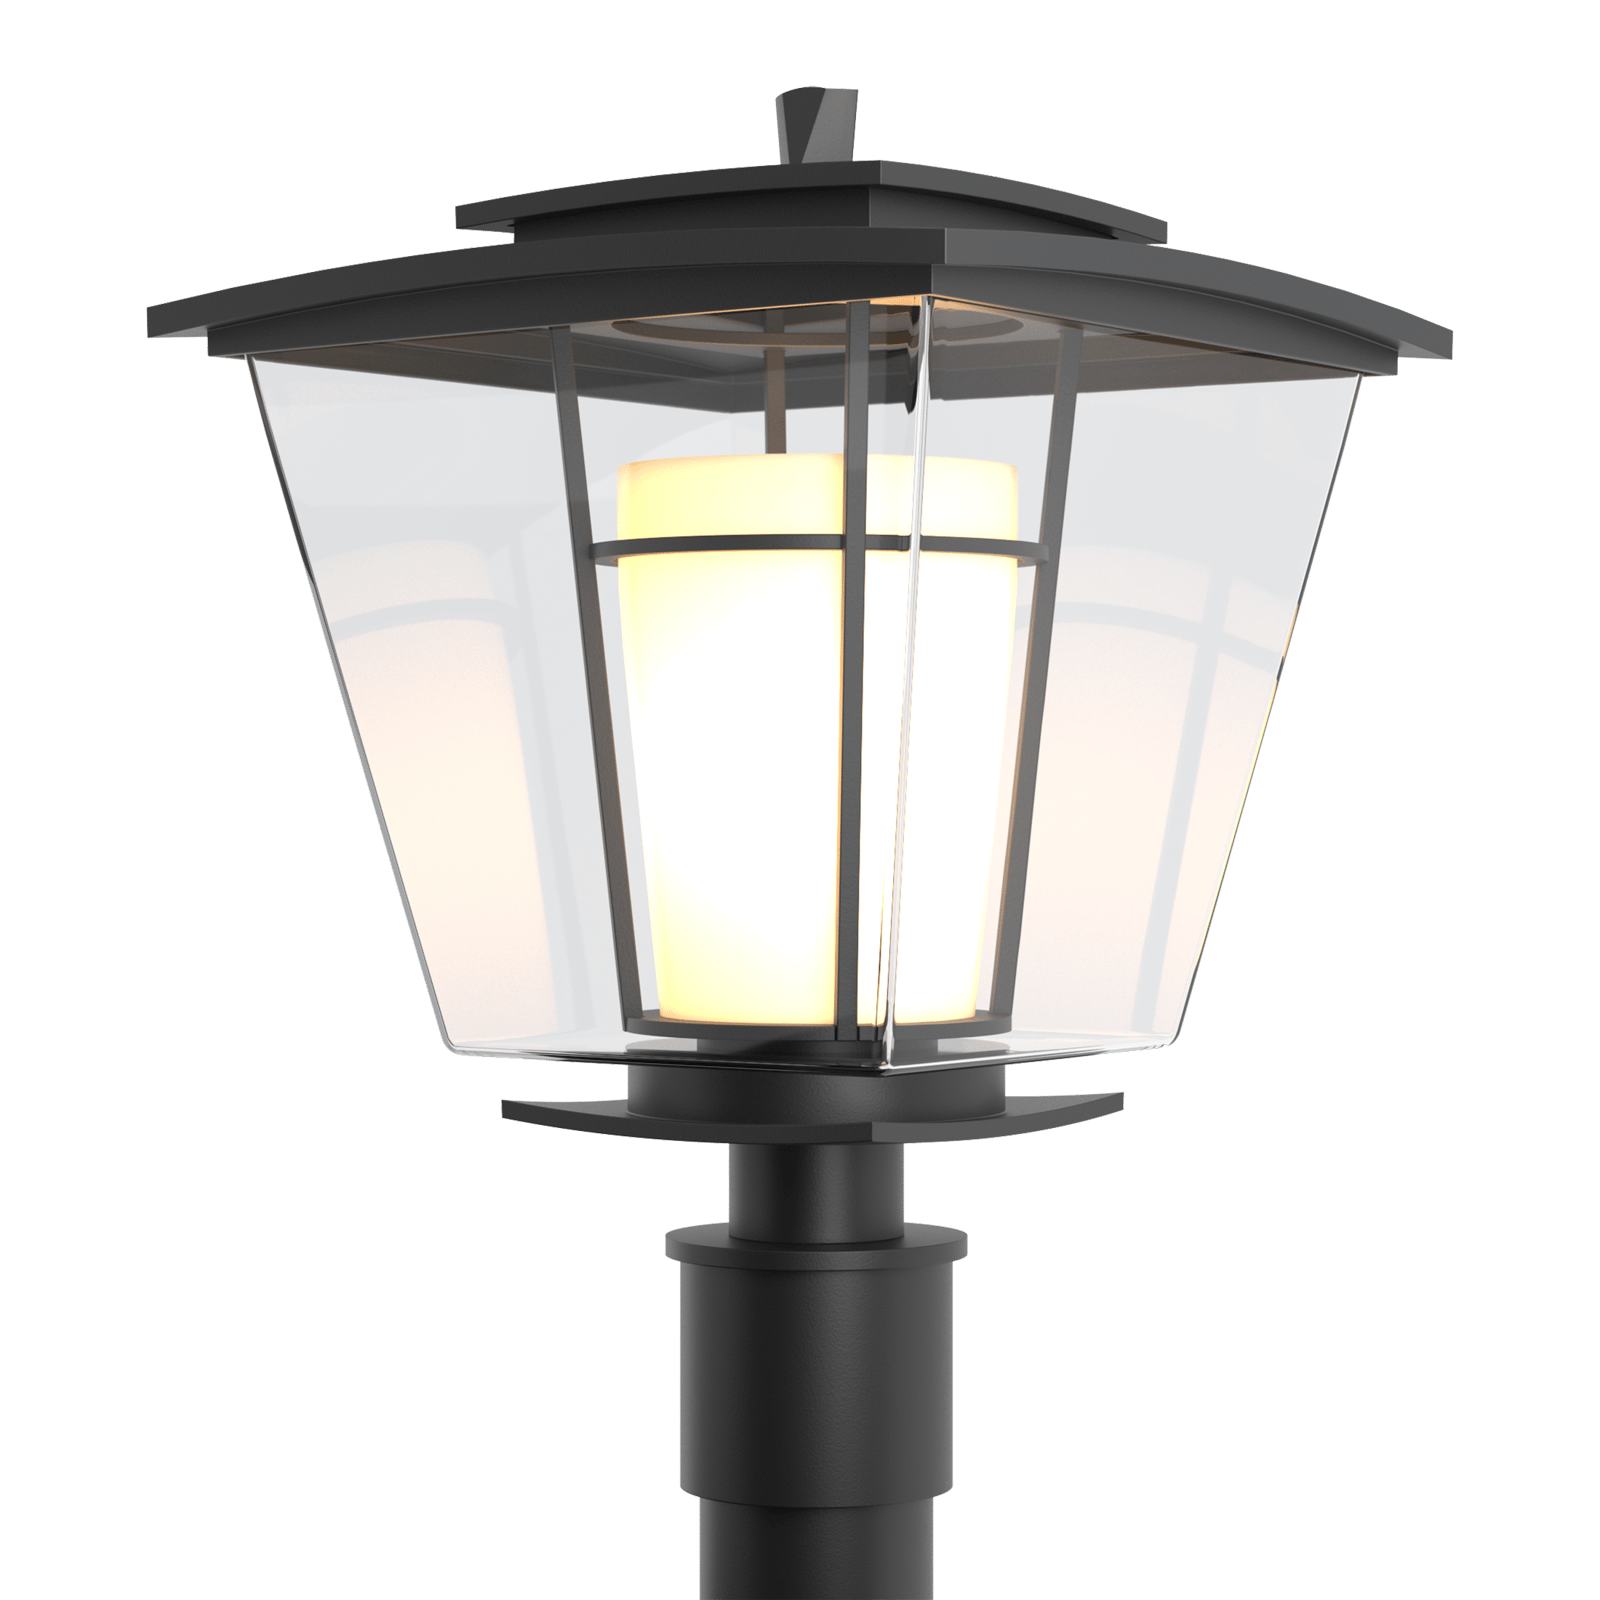 Hubbardton Forge Beacon Hall Outdoor Post Light Outdoor l Post/Pier Mounts Hubbardton Forge Coastal Black Clear Glass with Opal Diffuser (ZU) 